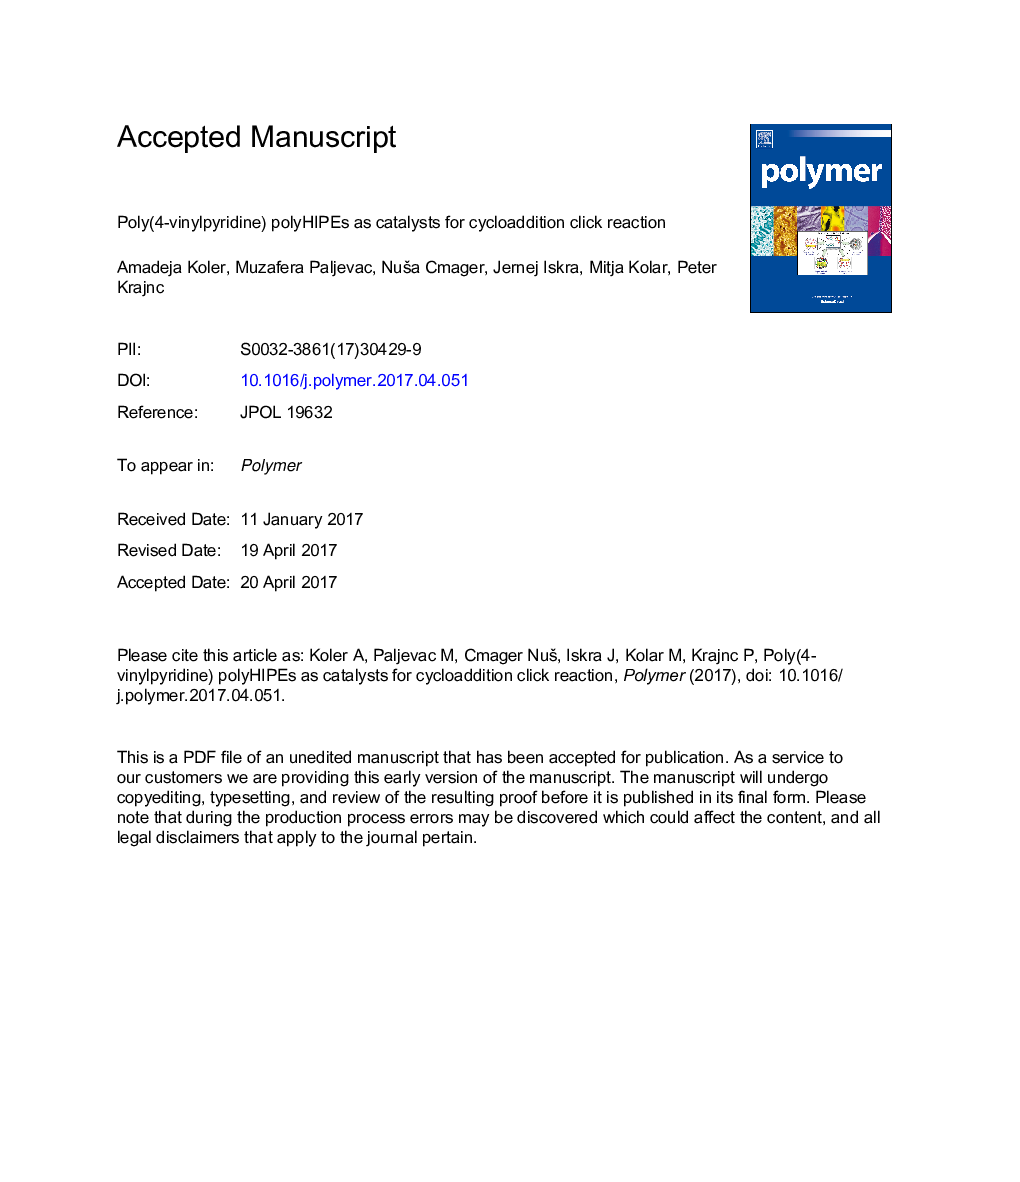 Poly(4-vinylpyridine) polyHIPEs as catalysts for cycloaddition click reaction